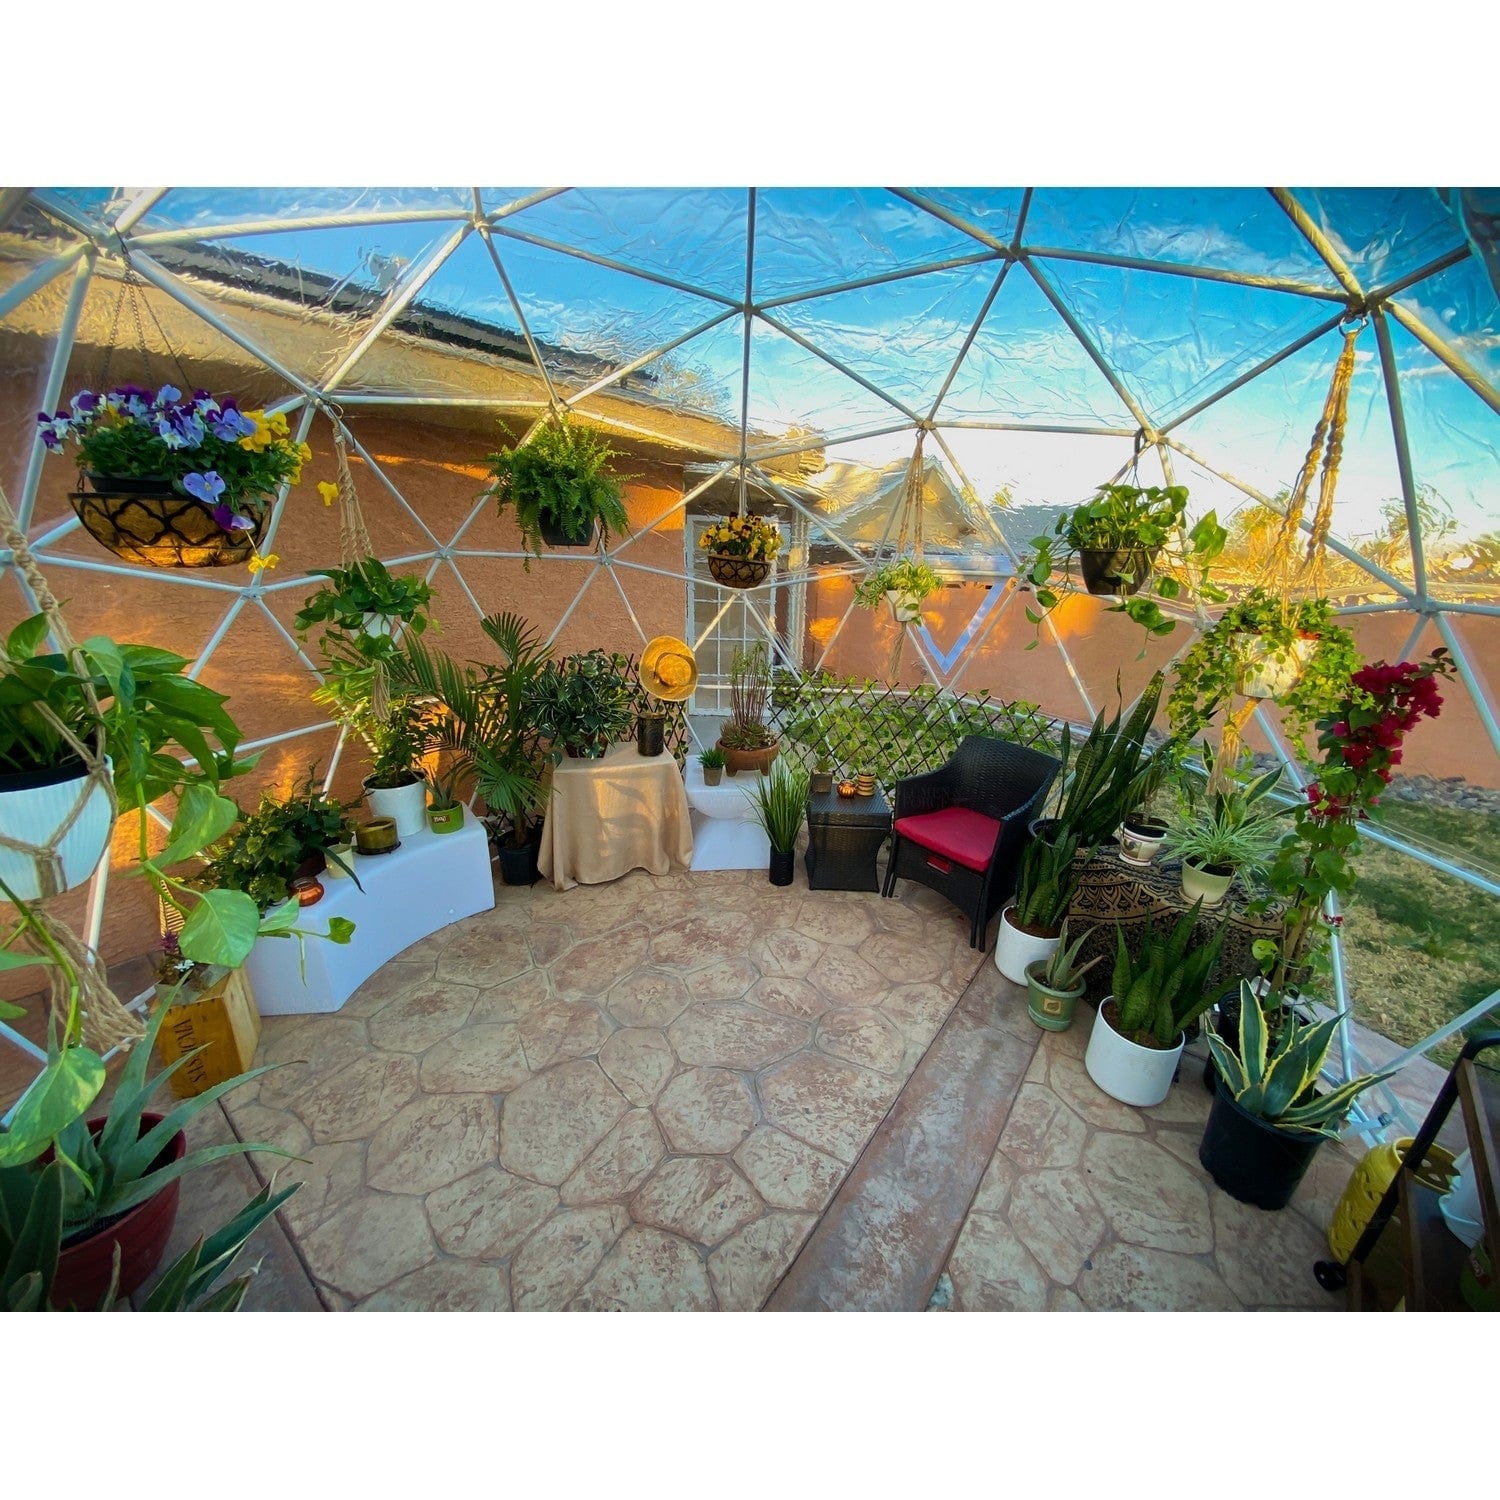 Lumen & Forge Sun Room Kit Lumen & Forge | Geodesic Dome Greenhouse, Sunroom, Dining - 20 ft 6m-Dome